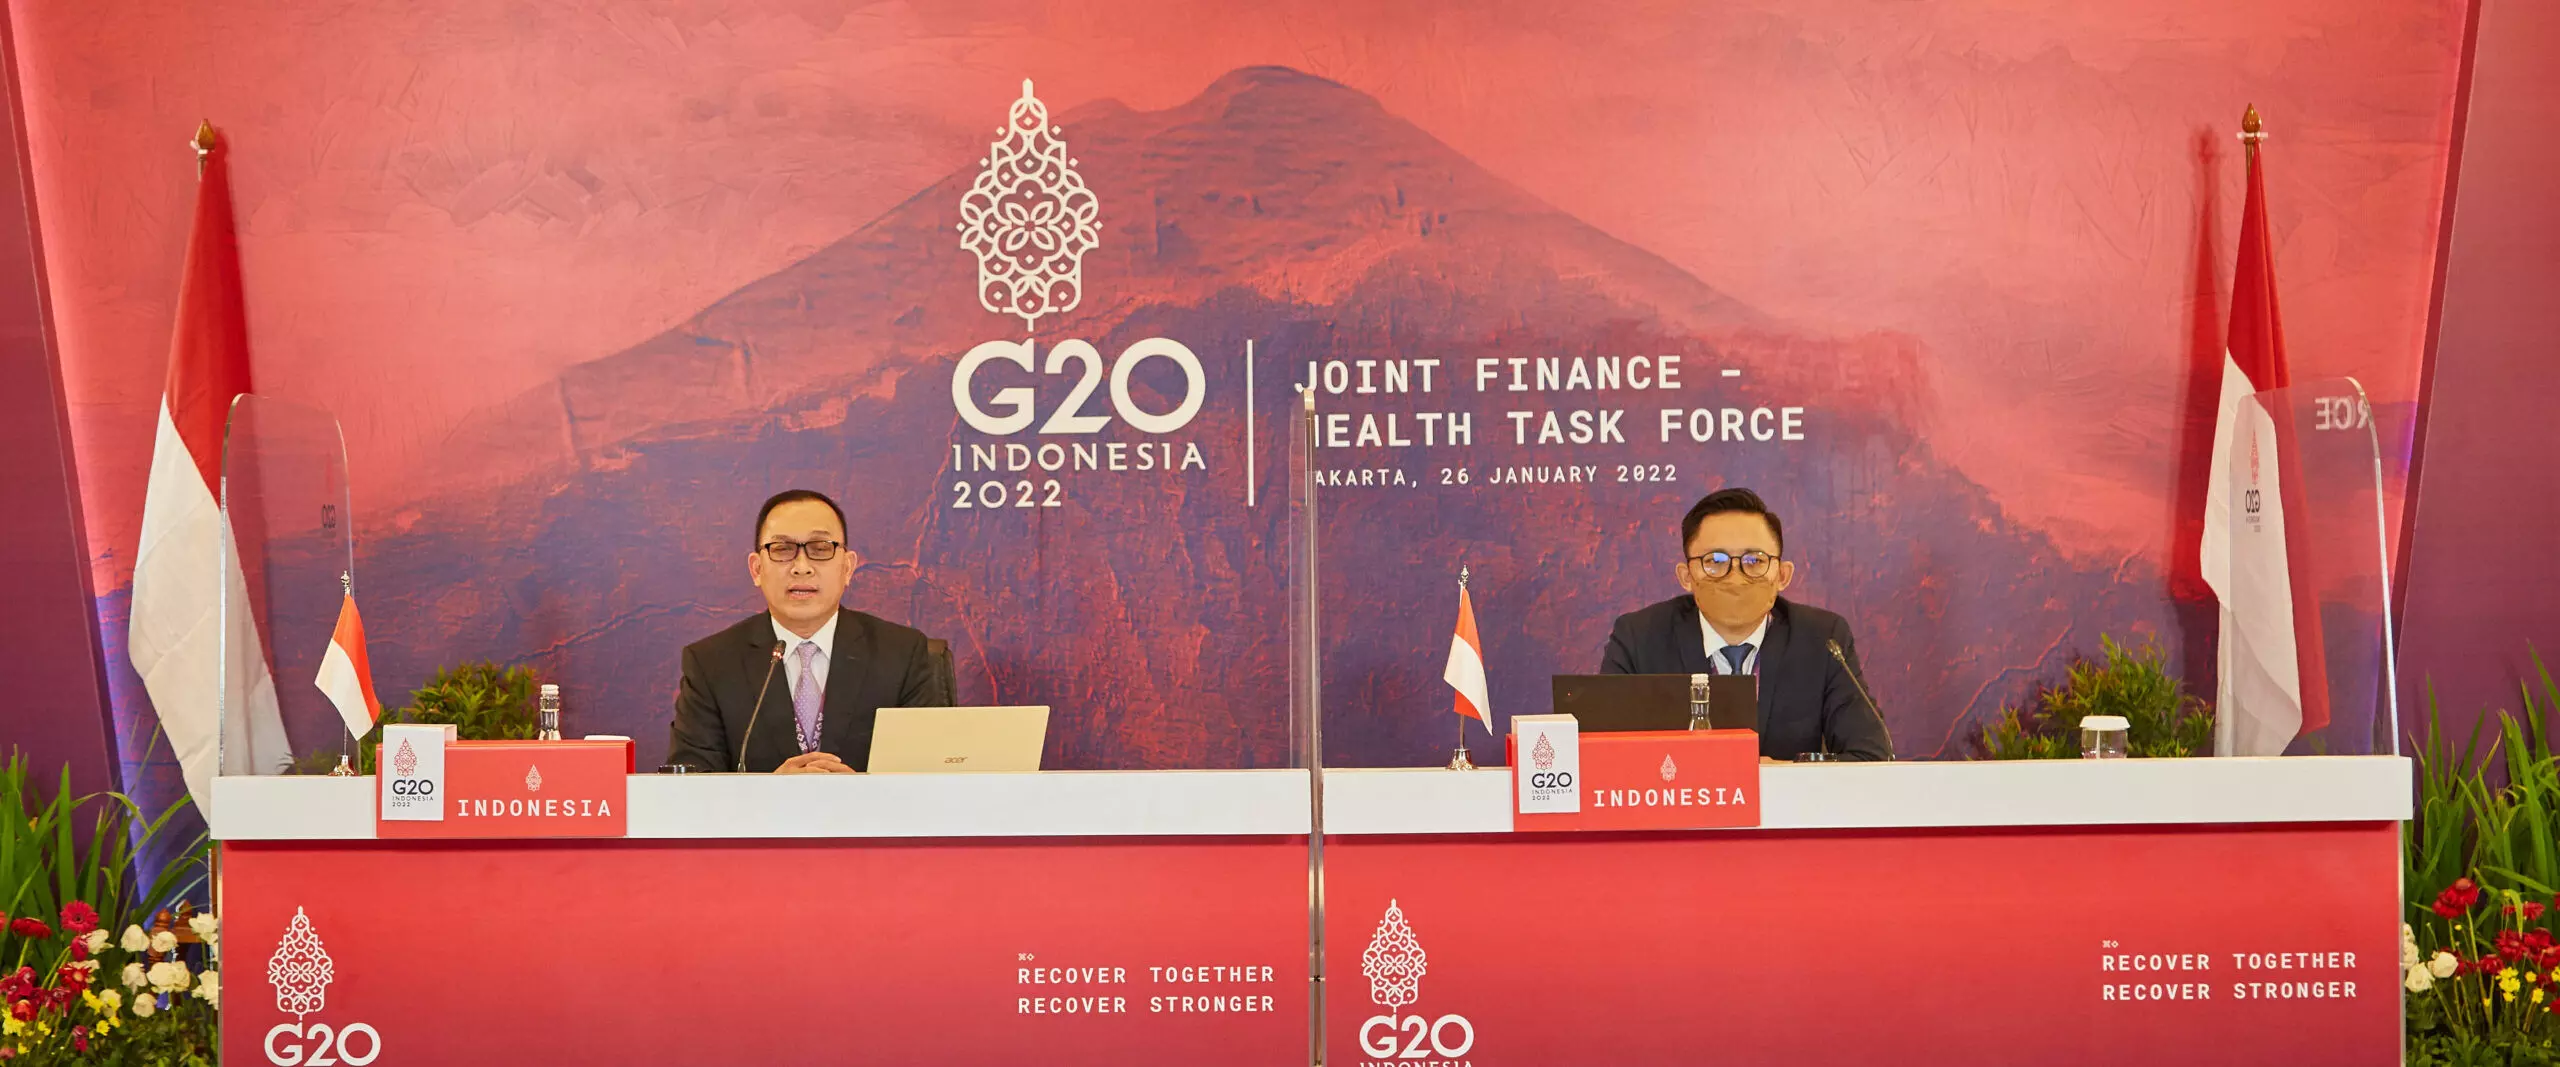 G20 health, finance ministers meet to discuss pandemic fund